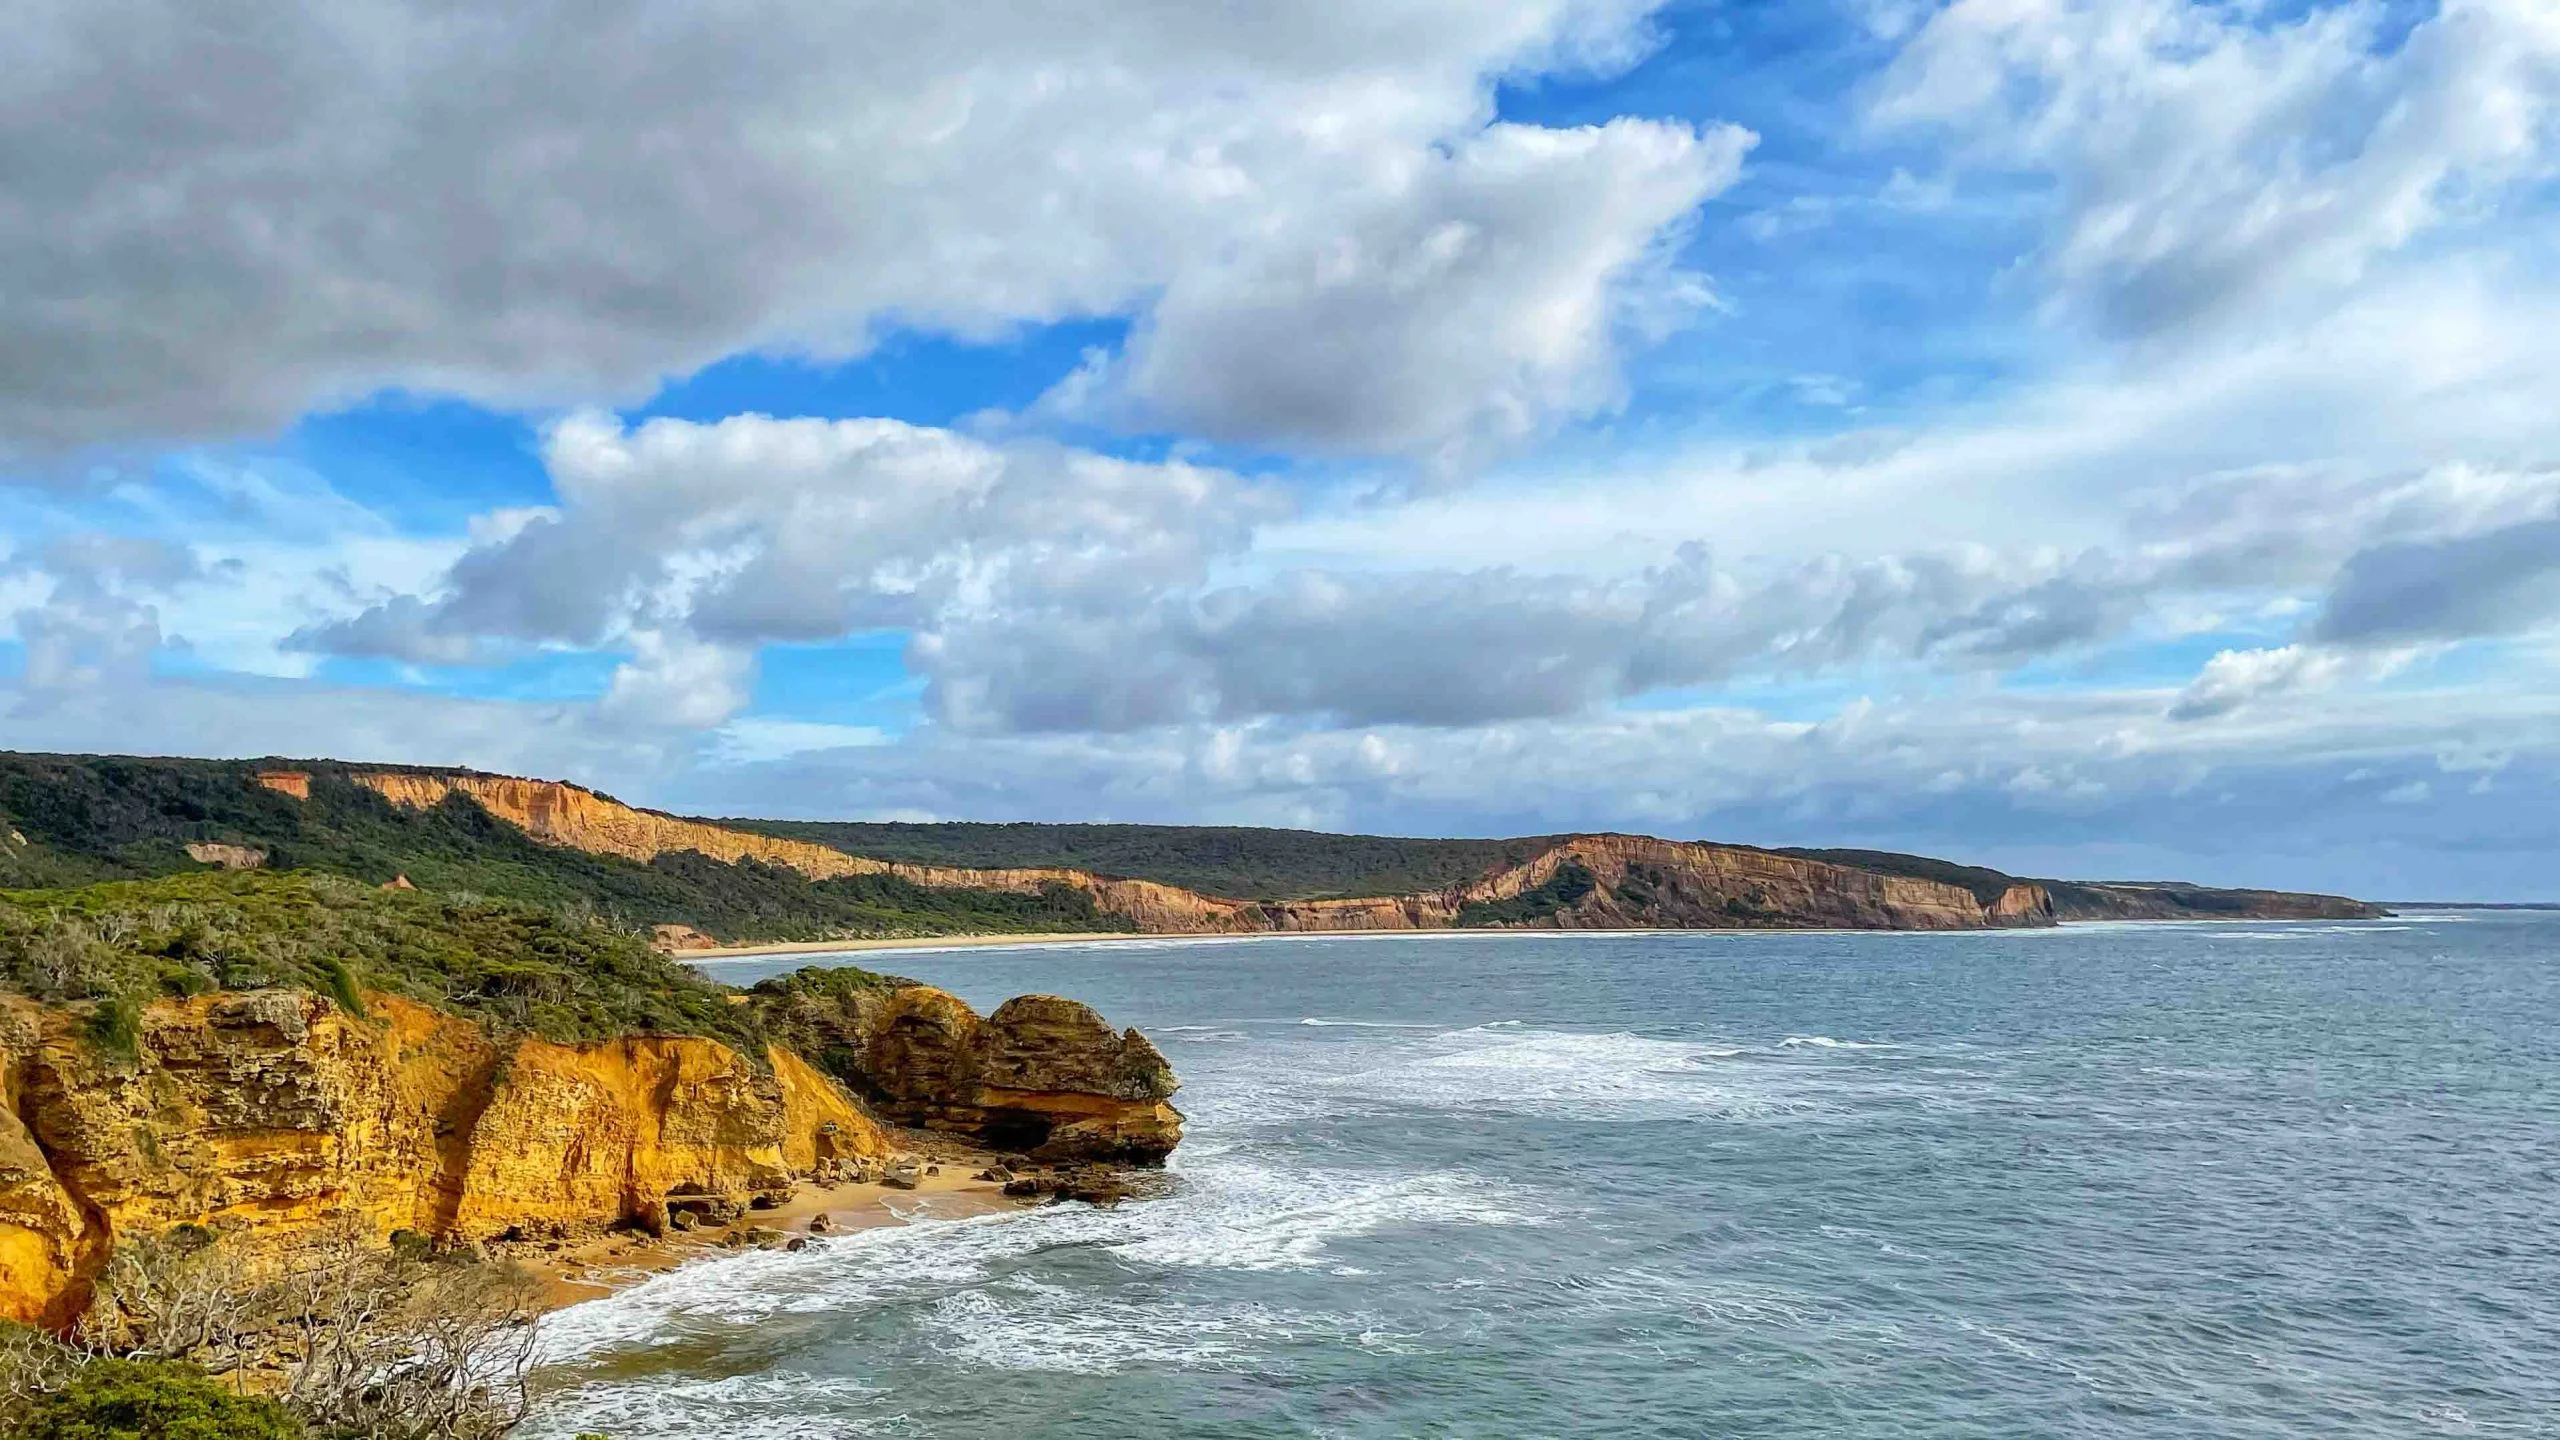 View from Point Addis (near Anglesea) looking towards Torquay